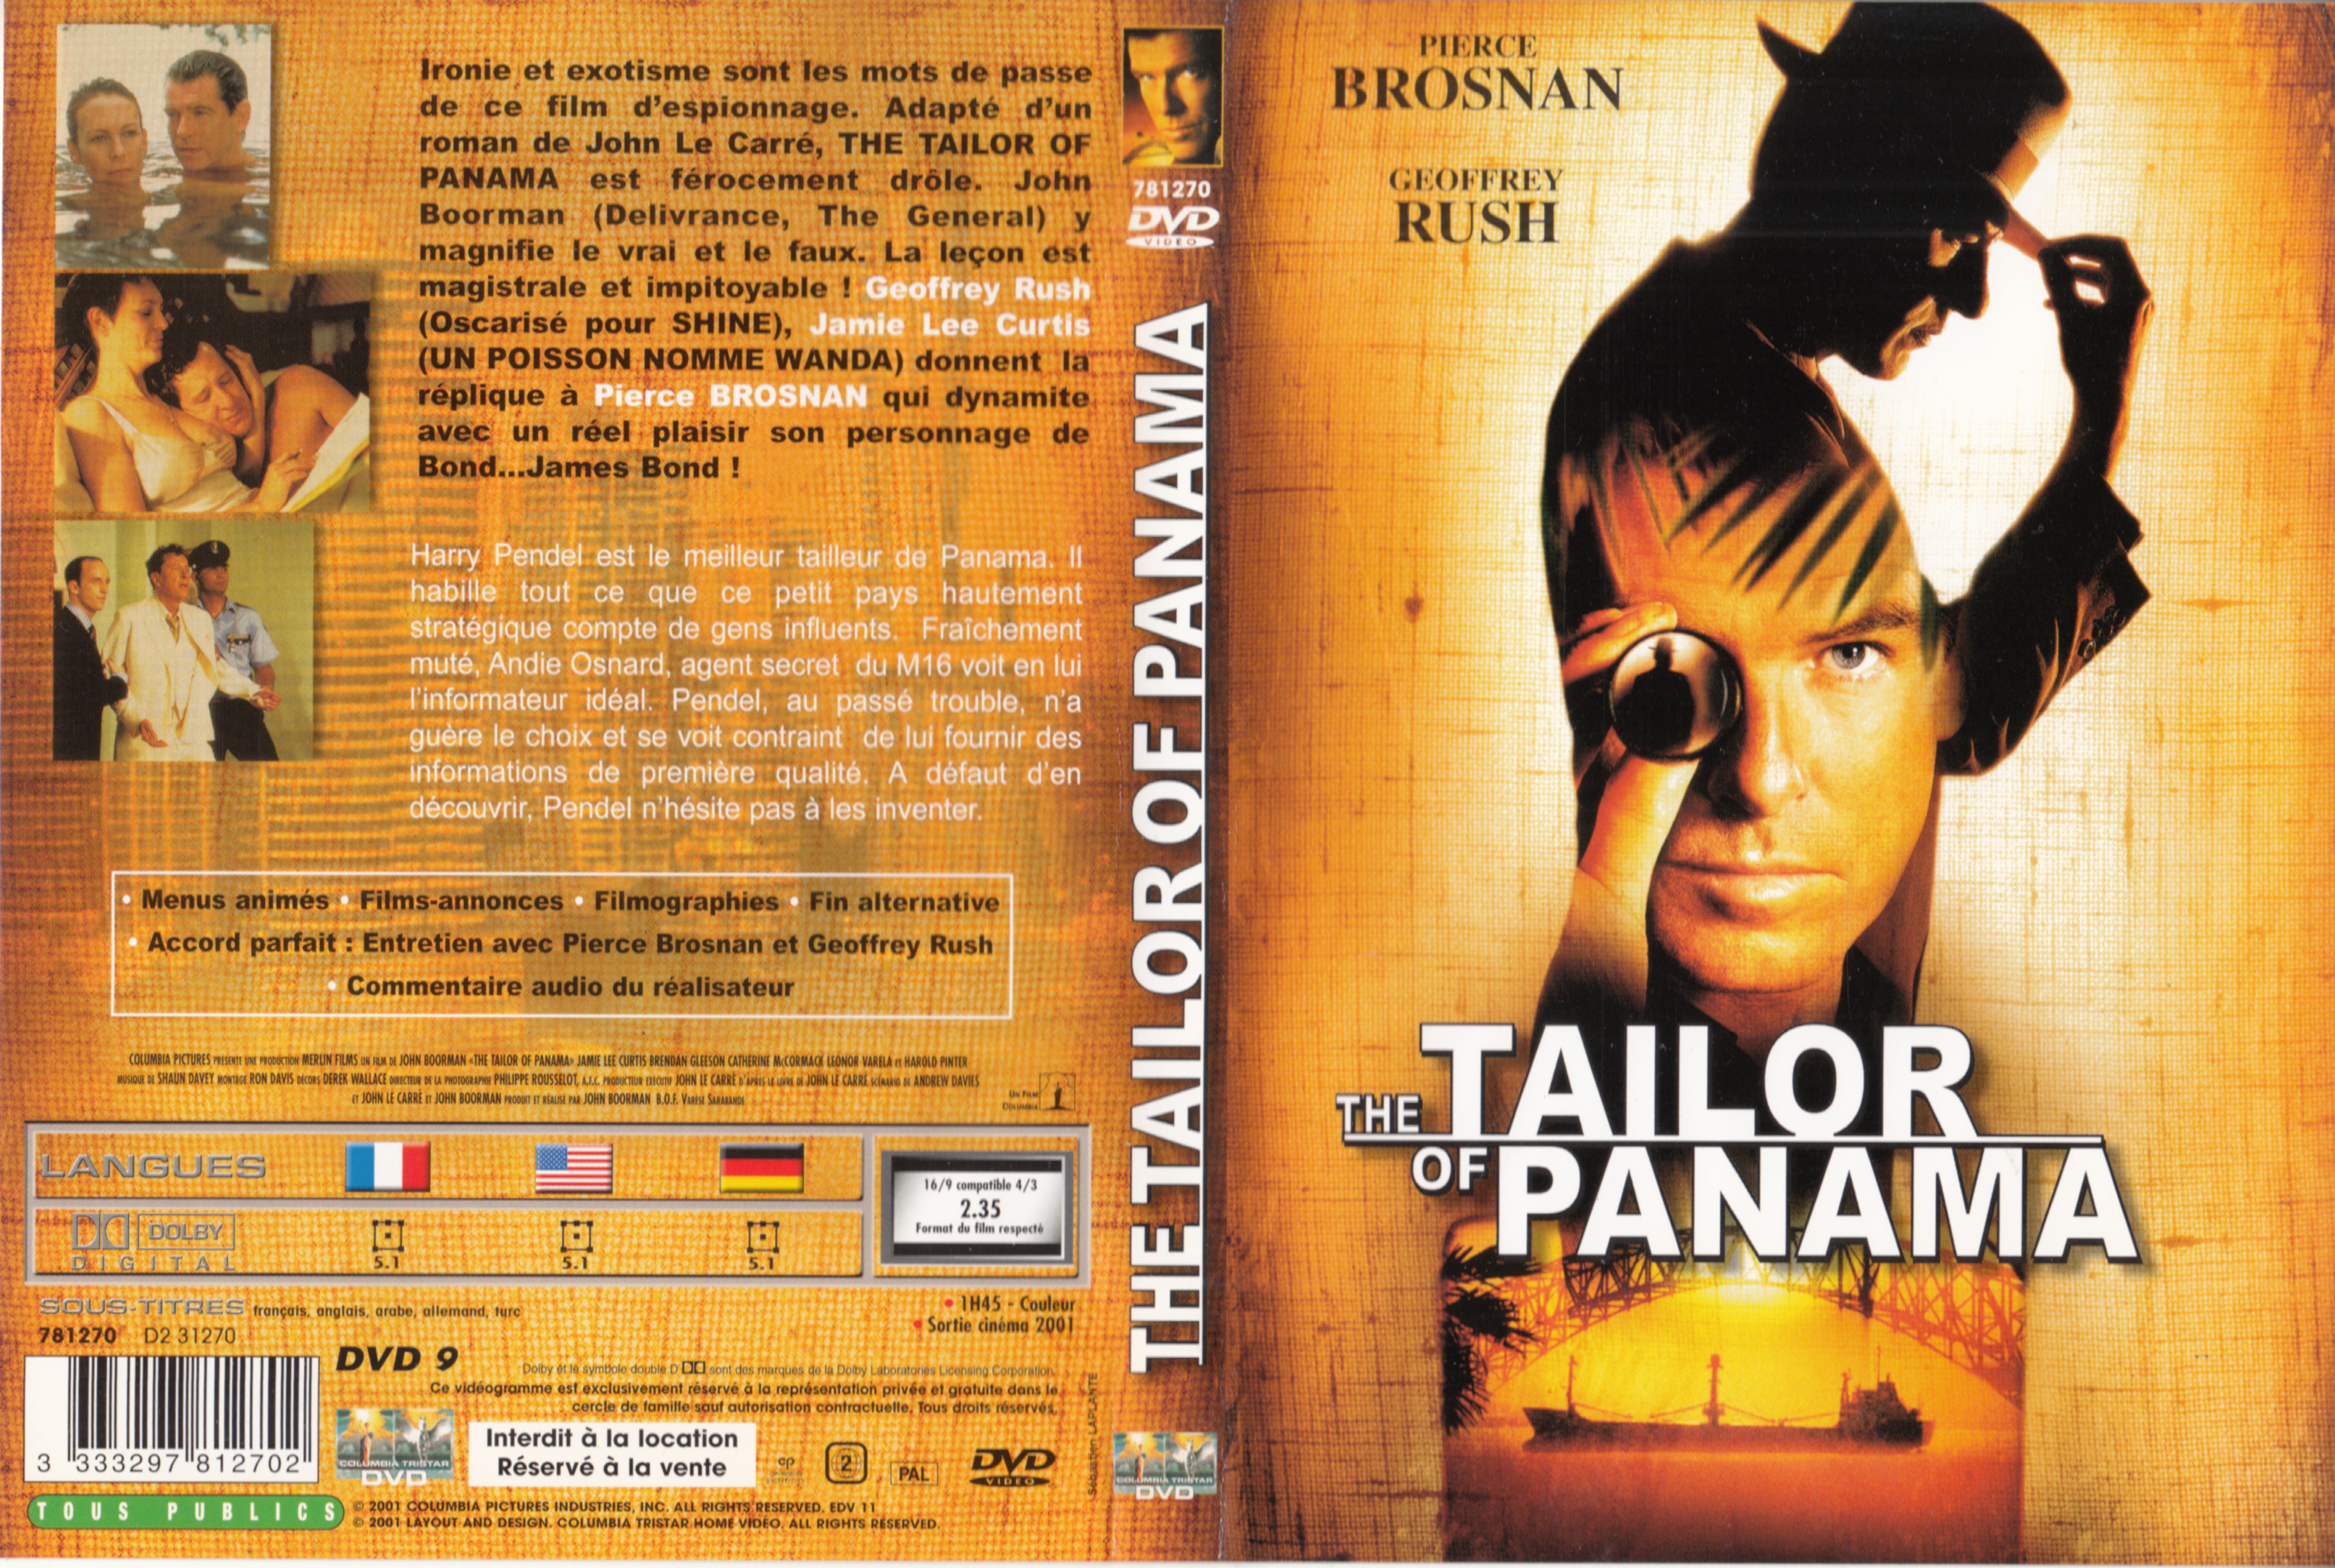 Jaquette DVD The tailor of panama v2